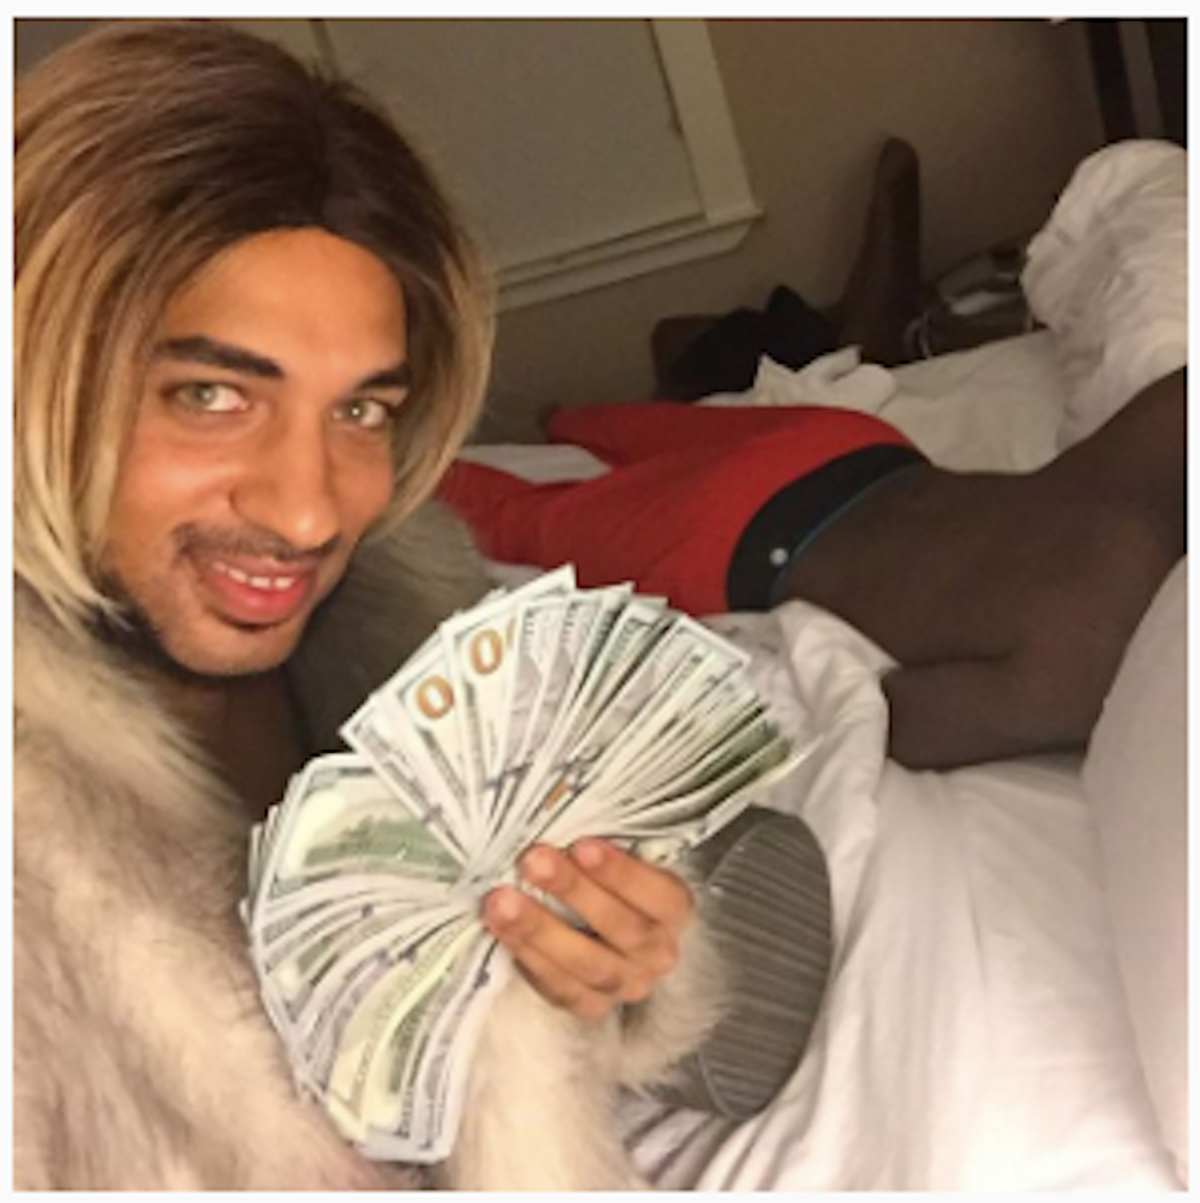 Joanne The Scammer Is Our Moral Liberation